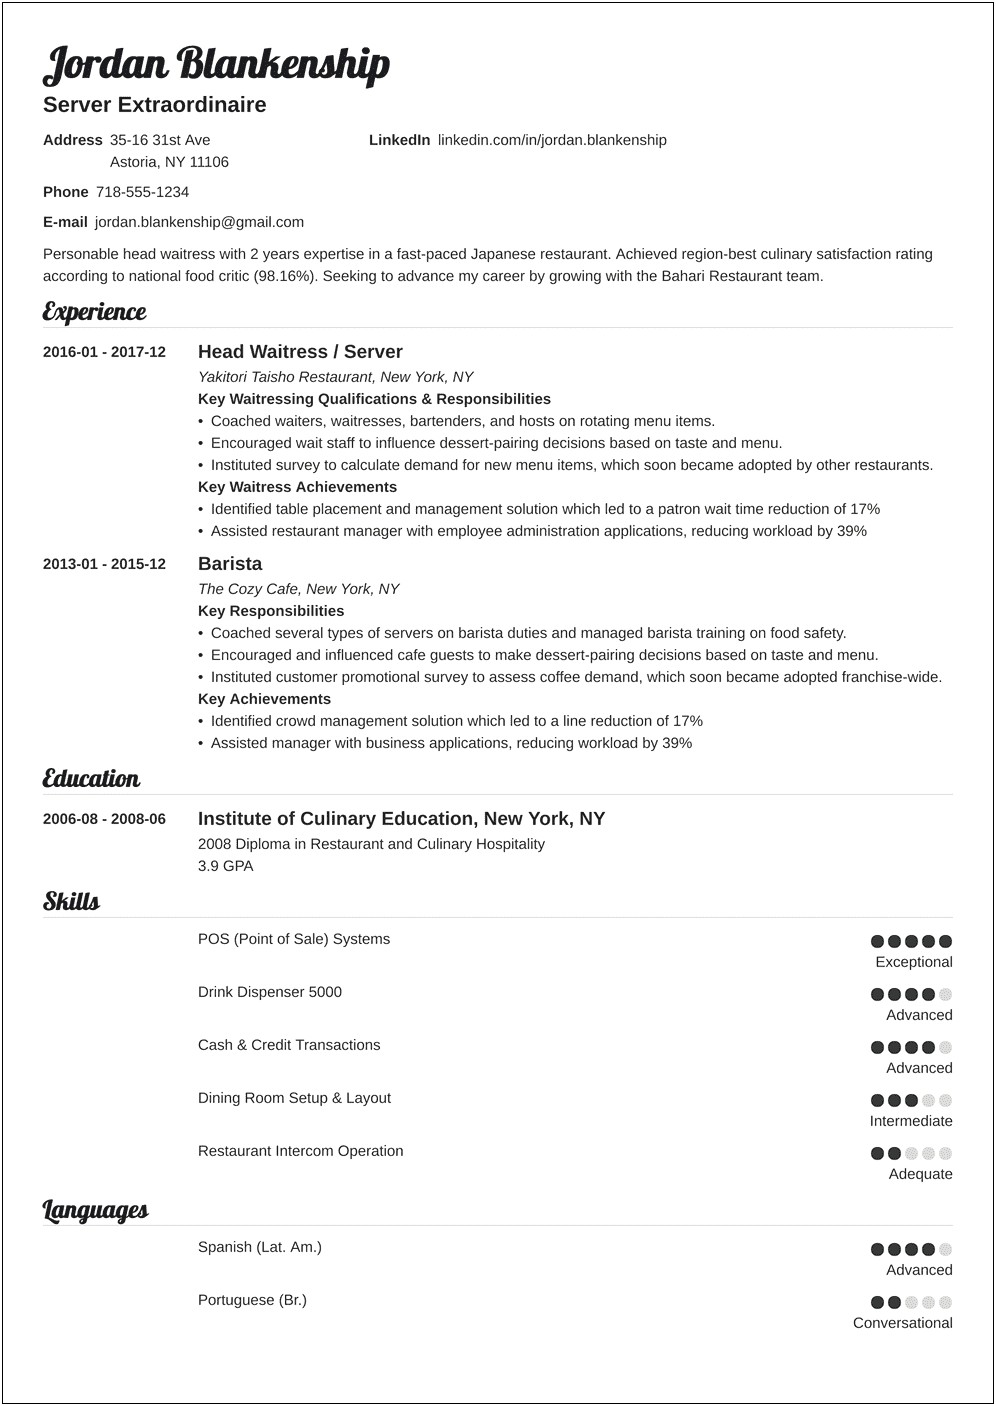 Samples Of Resume Summary Statements For Food Server